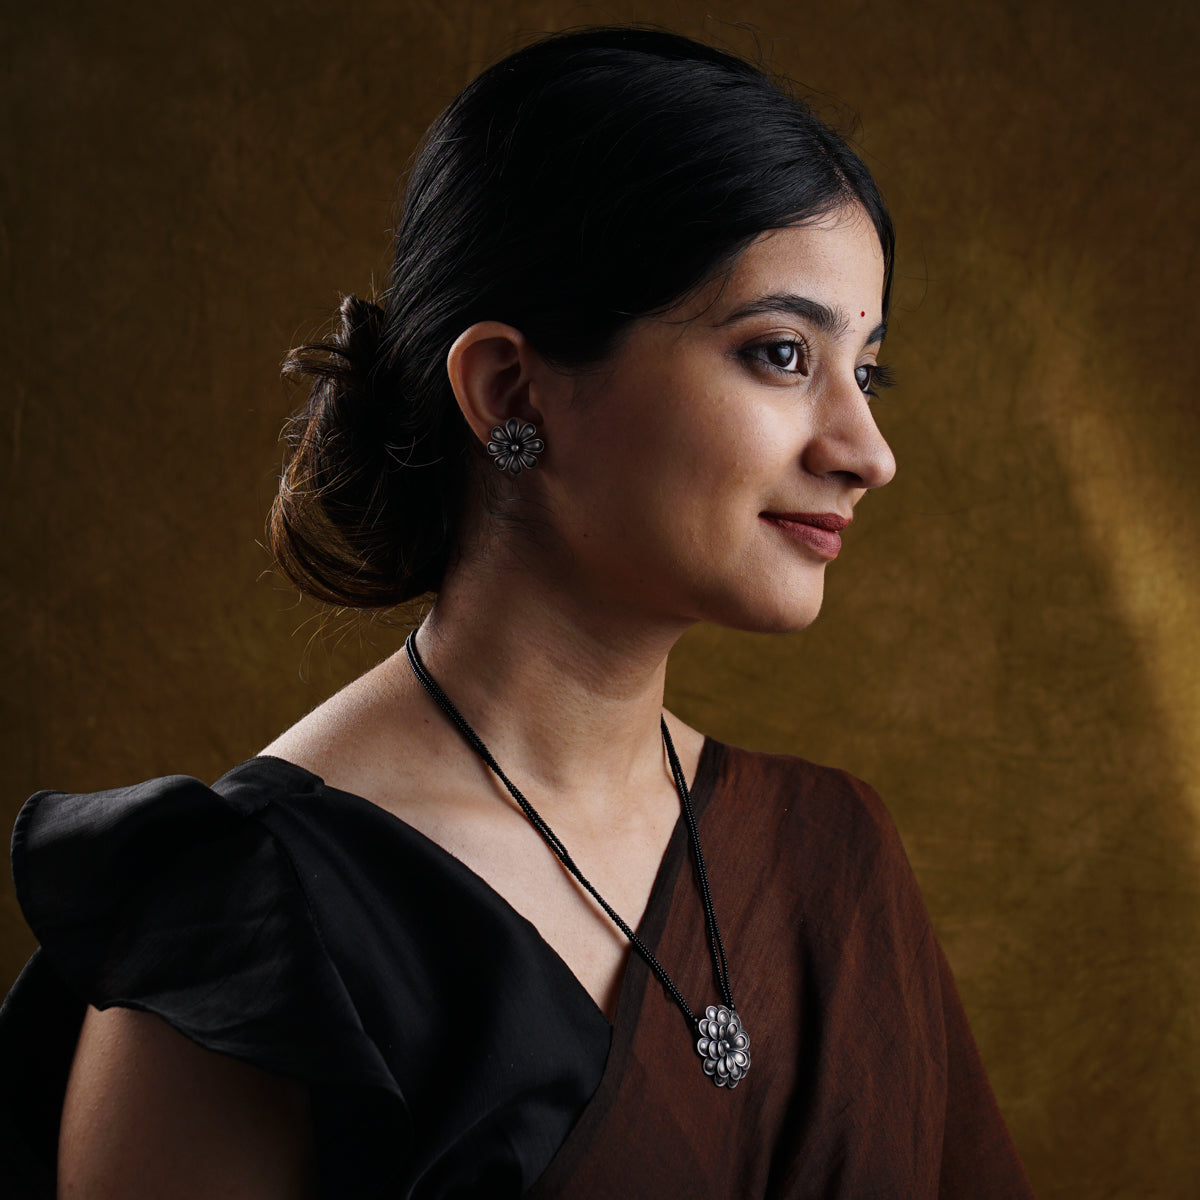 a woman wearing a necklace and a black dress